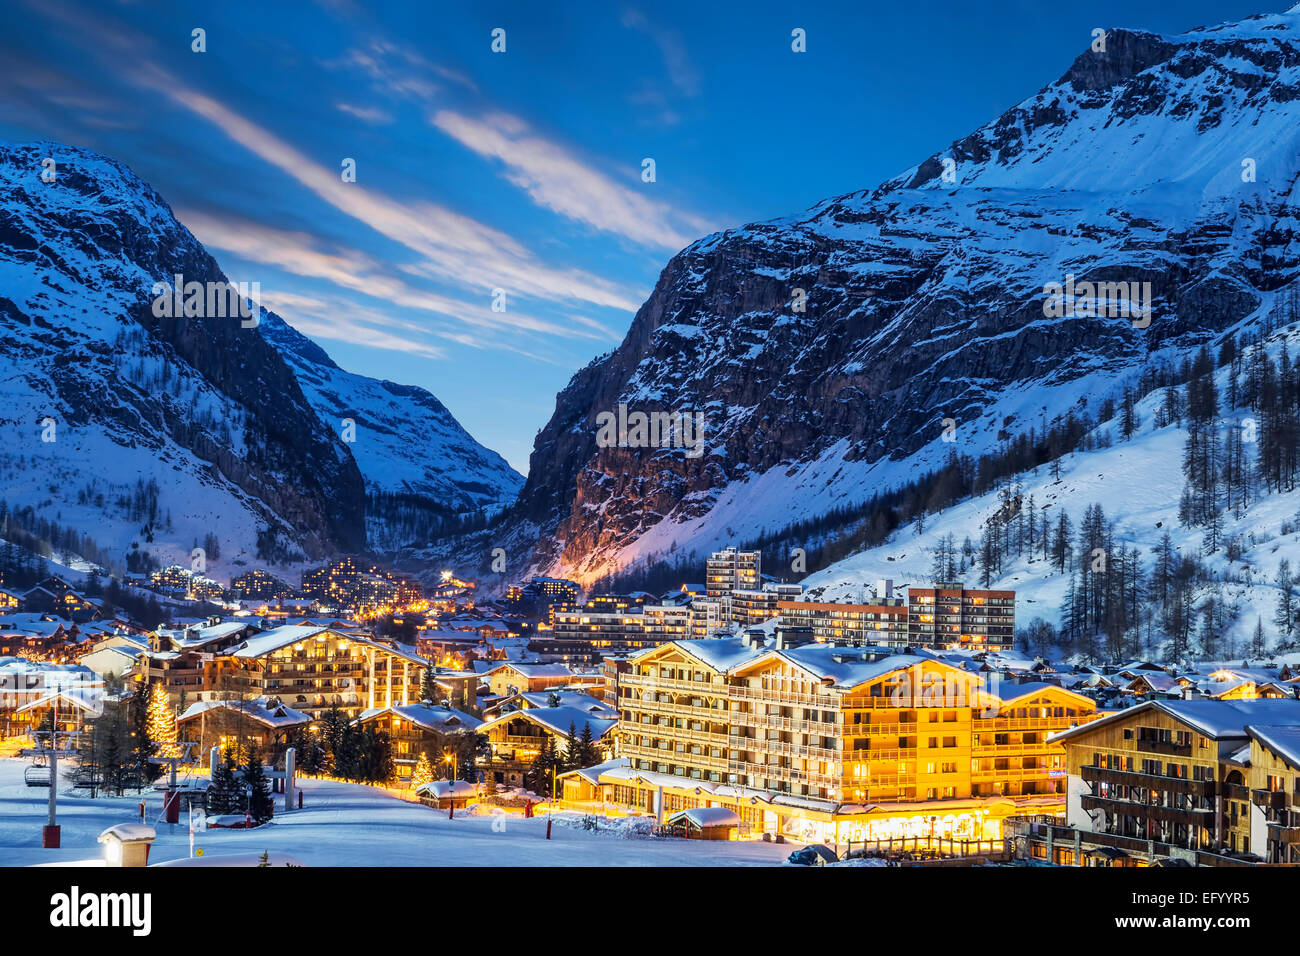 Evening landscape and ski resort in French Alps, Val d'Isere, France Stock Photo